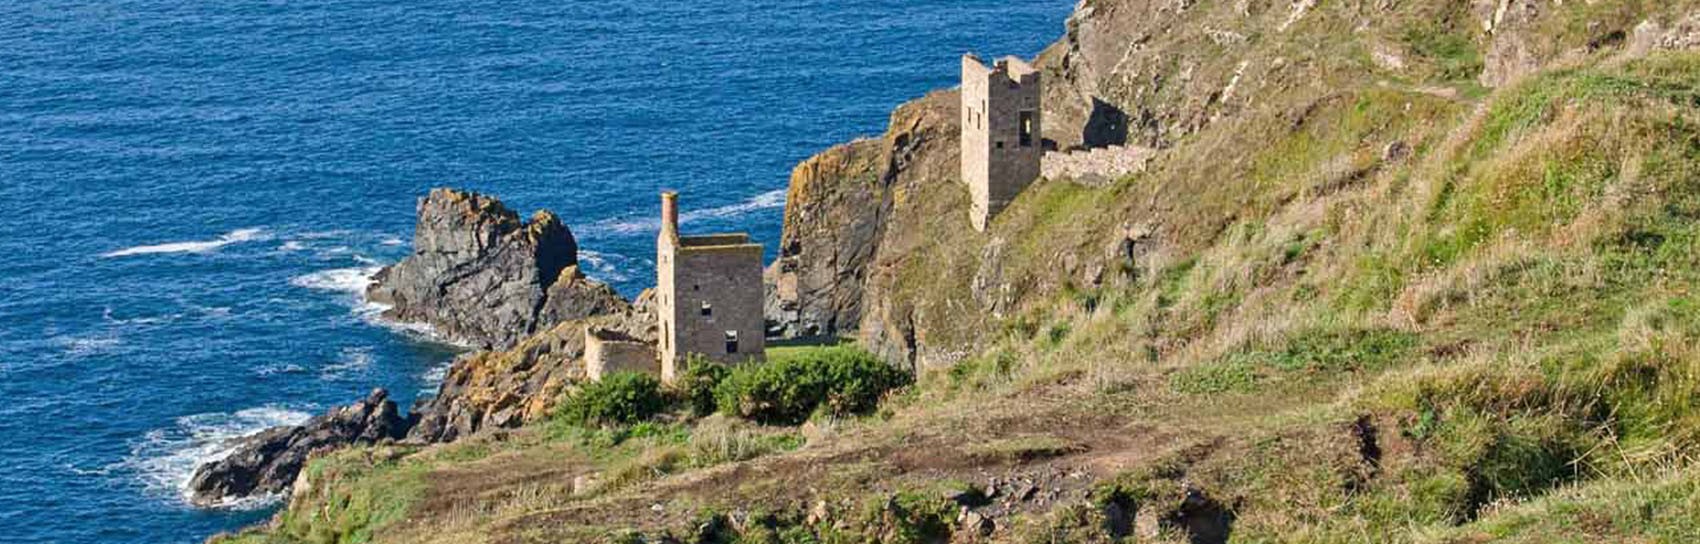 Ruined tin mines at Botallack in Cornwall. Photograph by ALEX GRAEME